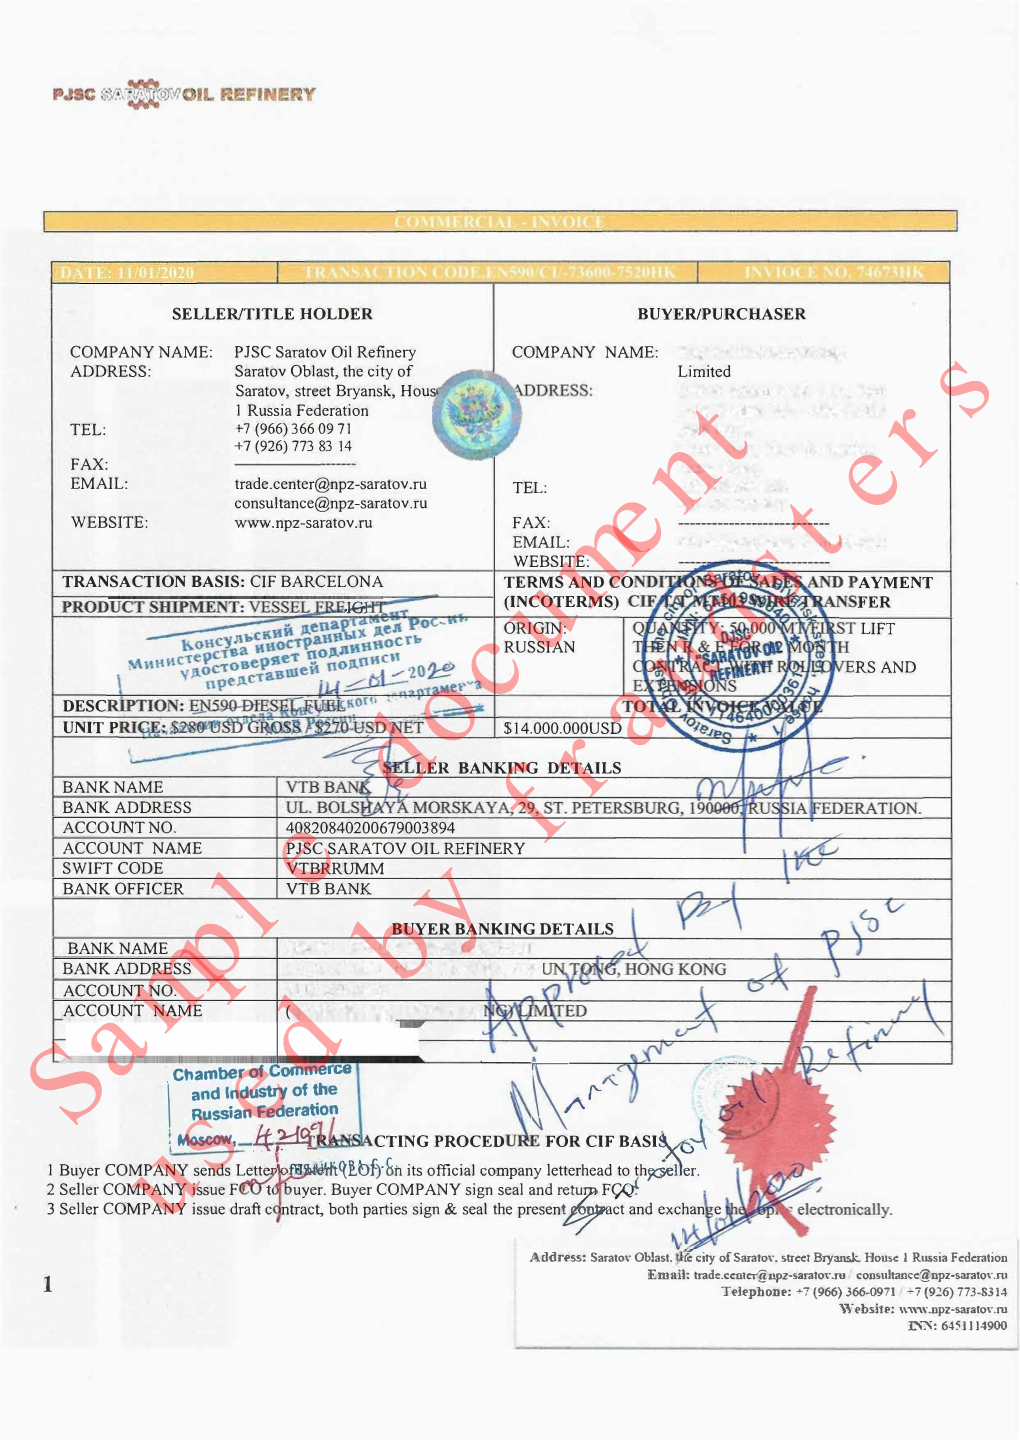 Example of Fake Documents